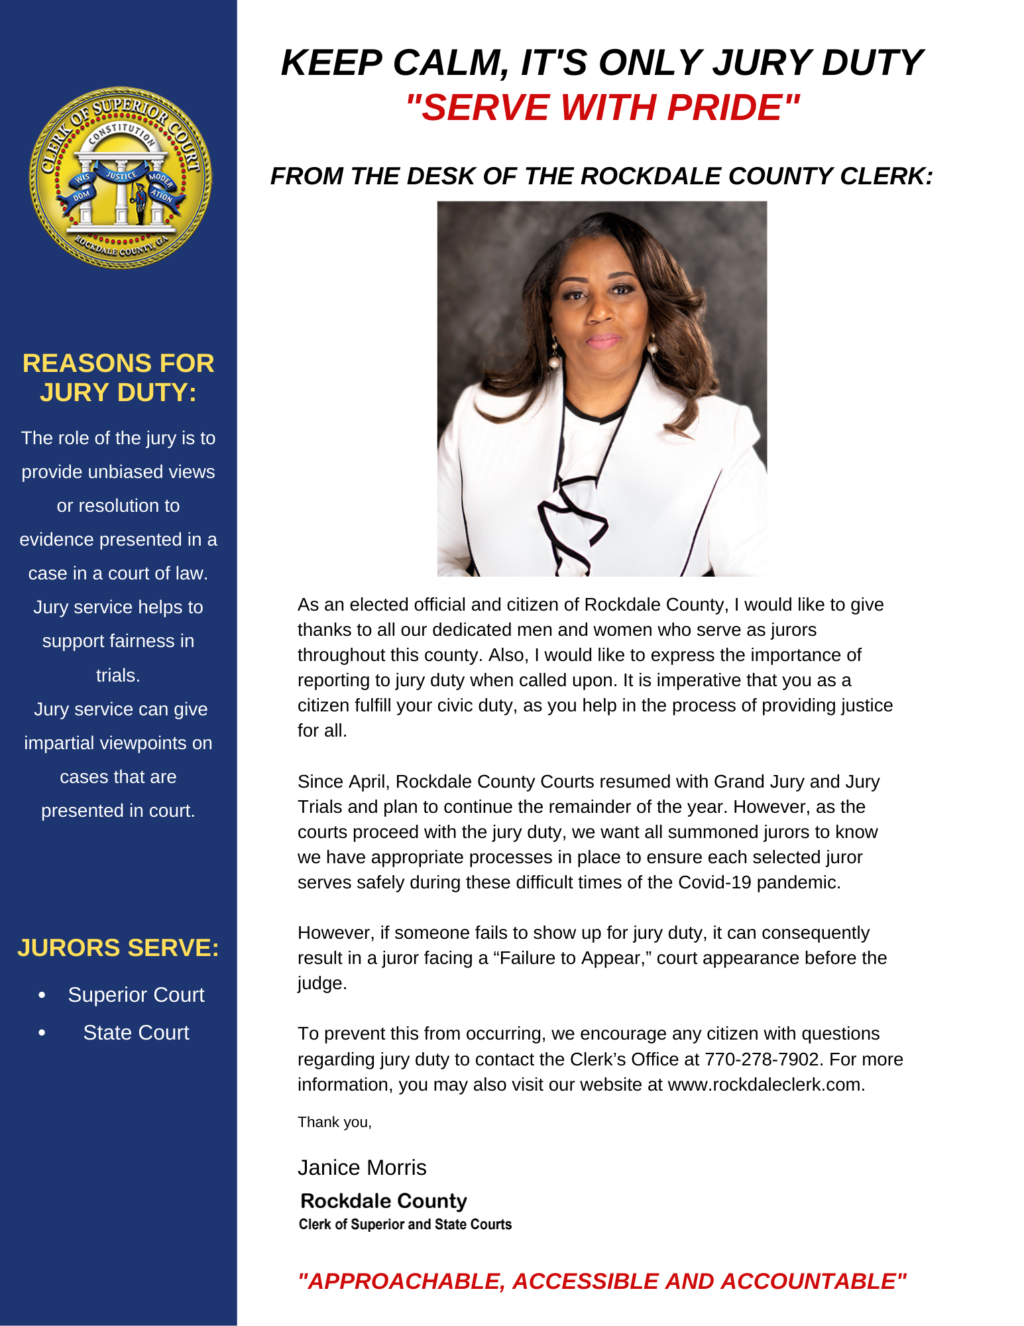 Rockdale County Clerk of Courts Janice Morris urges citizens to do